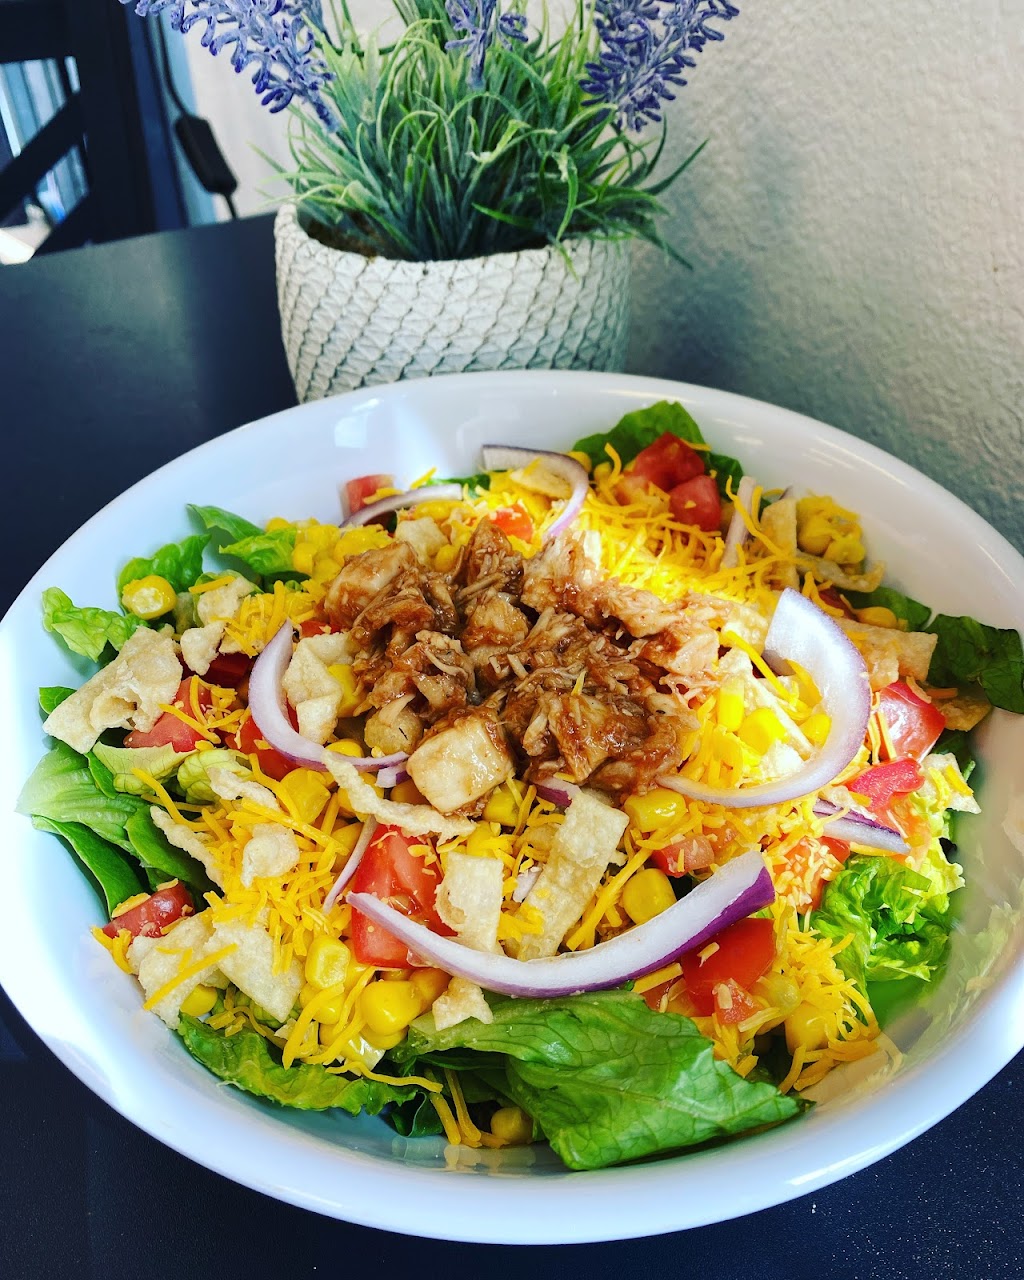 Salad Makers | 2565 Sand Creek Rd Suite 100, Brentwood, CA 94513 | Phone: (925) 240-2835